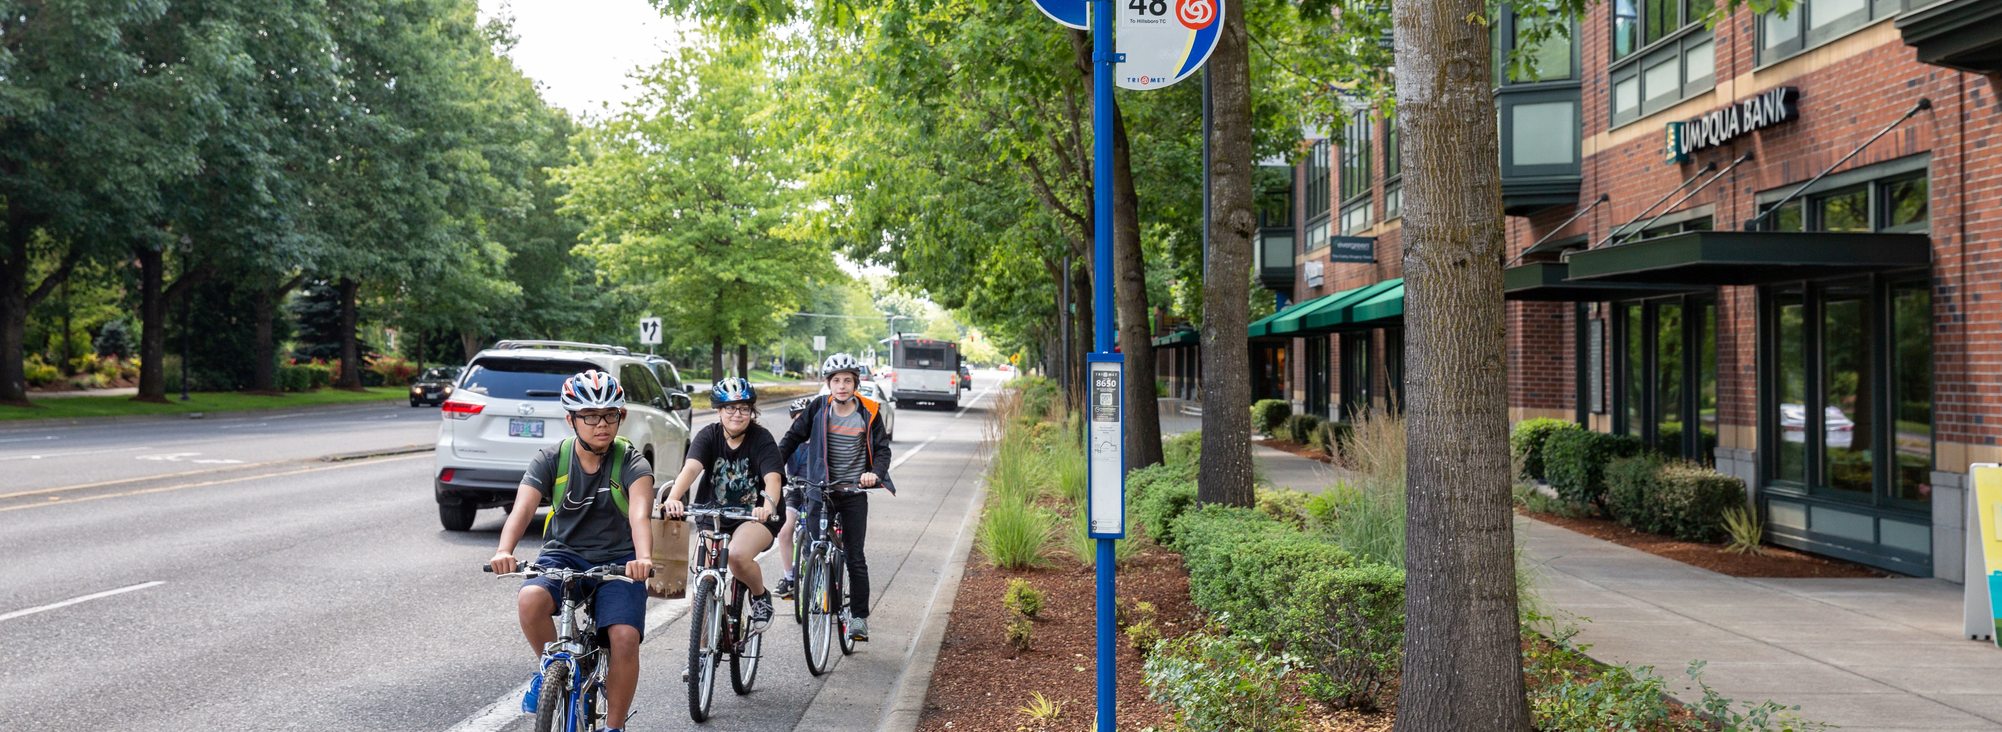 Three young people wearing helmets ride their bikes in a queue on the bike lane near the NE Cornell and Orenco Station bus stop next to an Umpqua Bank